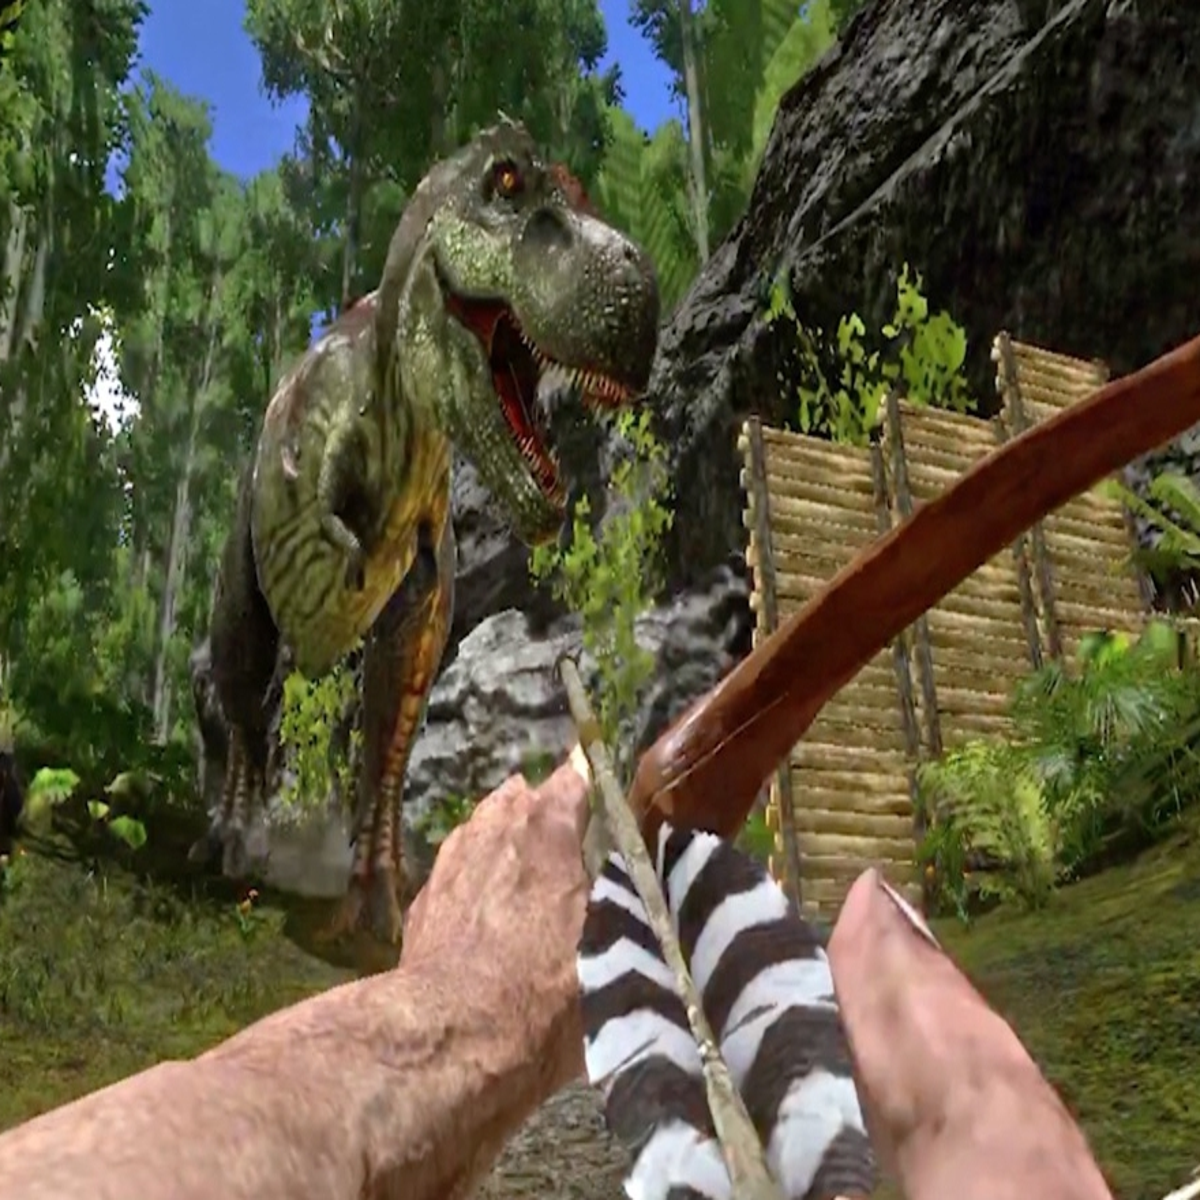 Is Ark 2 on Mobile Android and IOS? + Other related news 